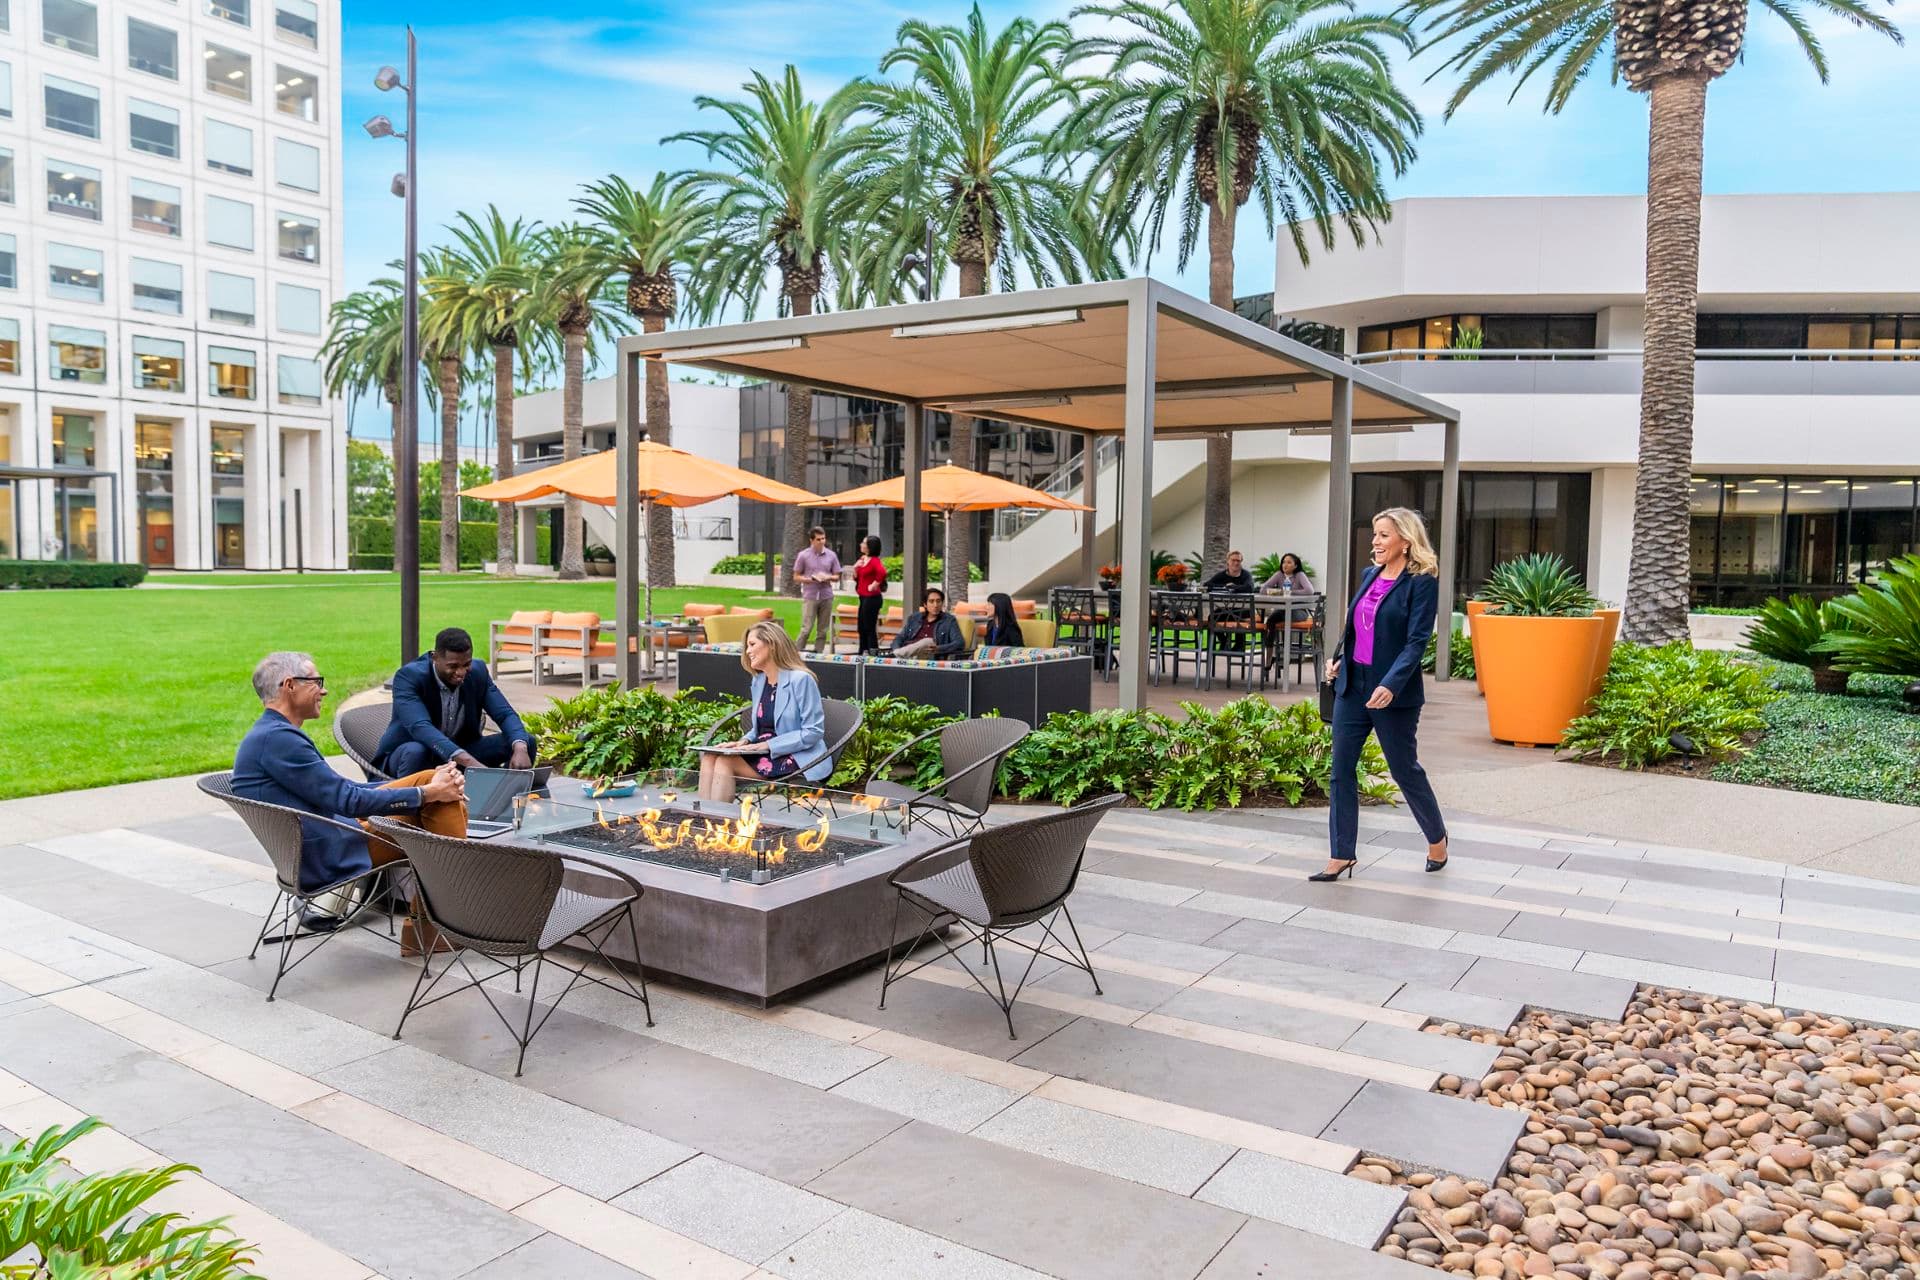 Lifestyle photography of the Commons at MacArthur Court, Irvine, Ca